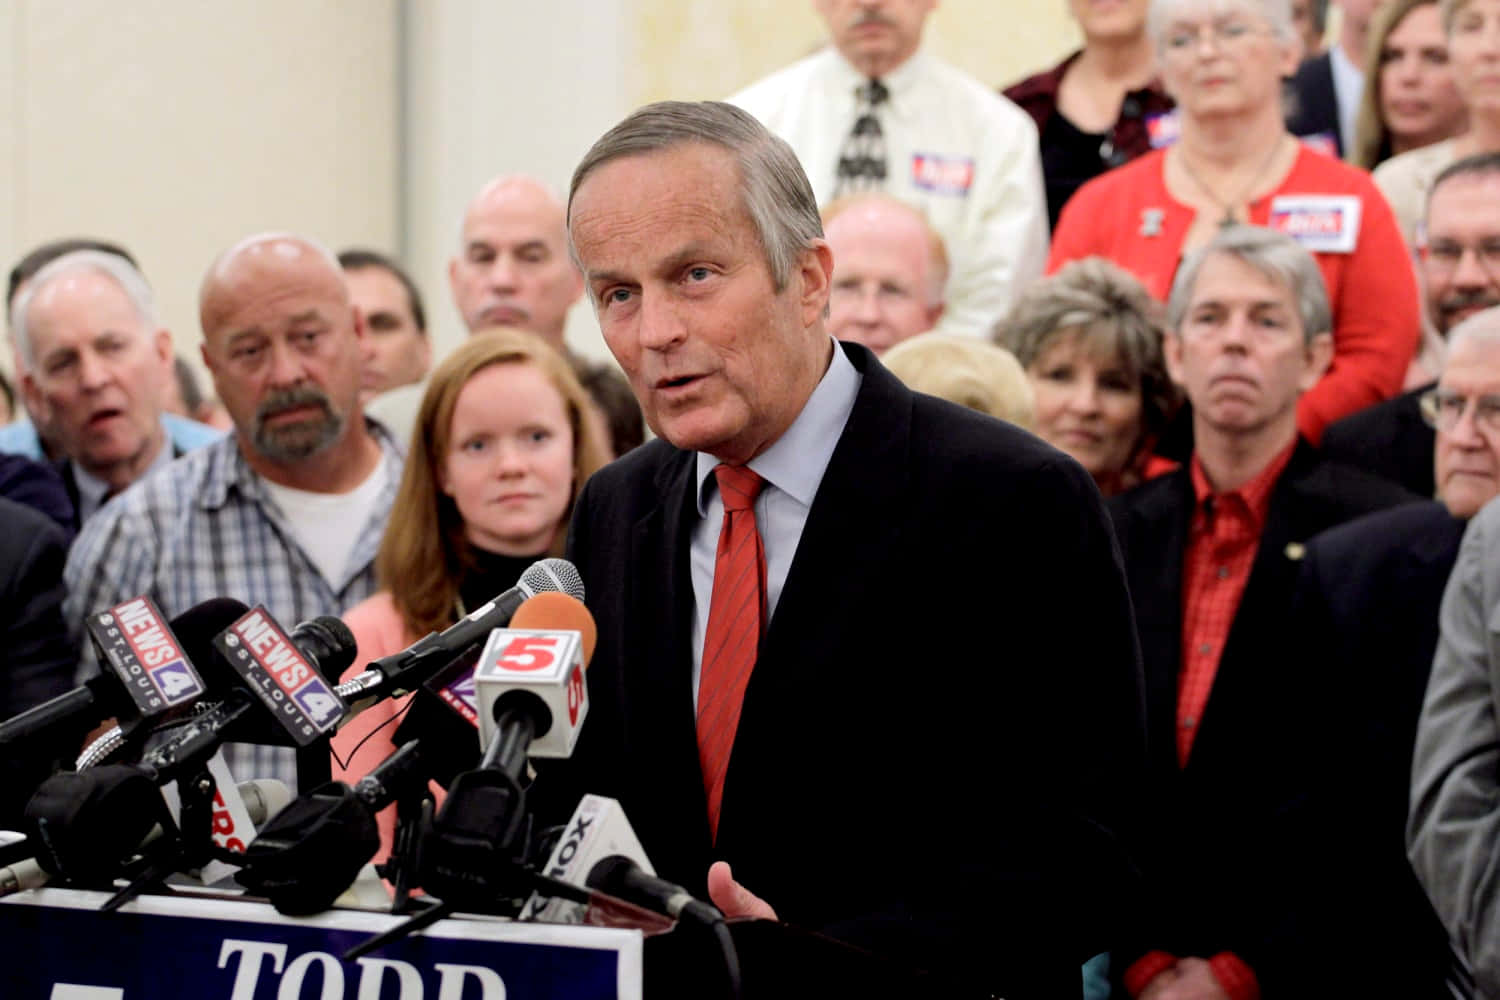 Todd Akin Speaking With Audience Background